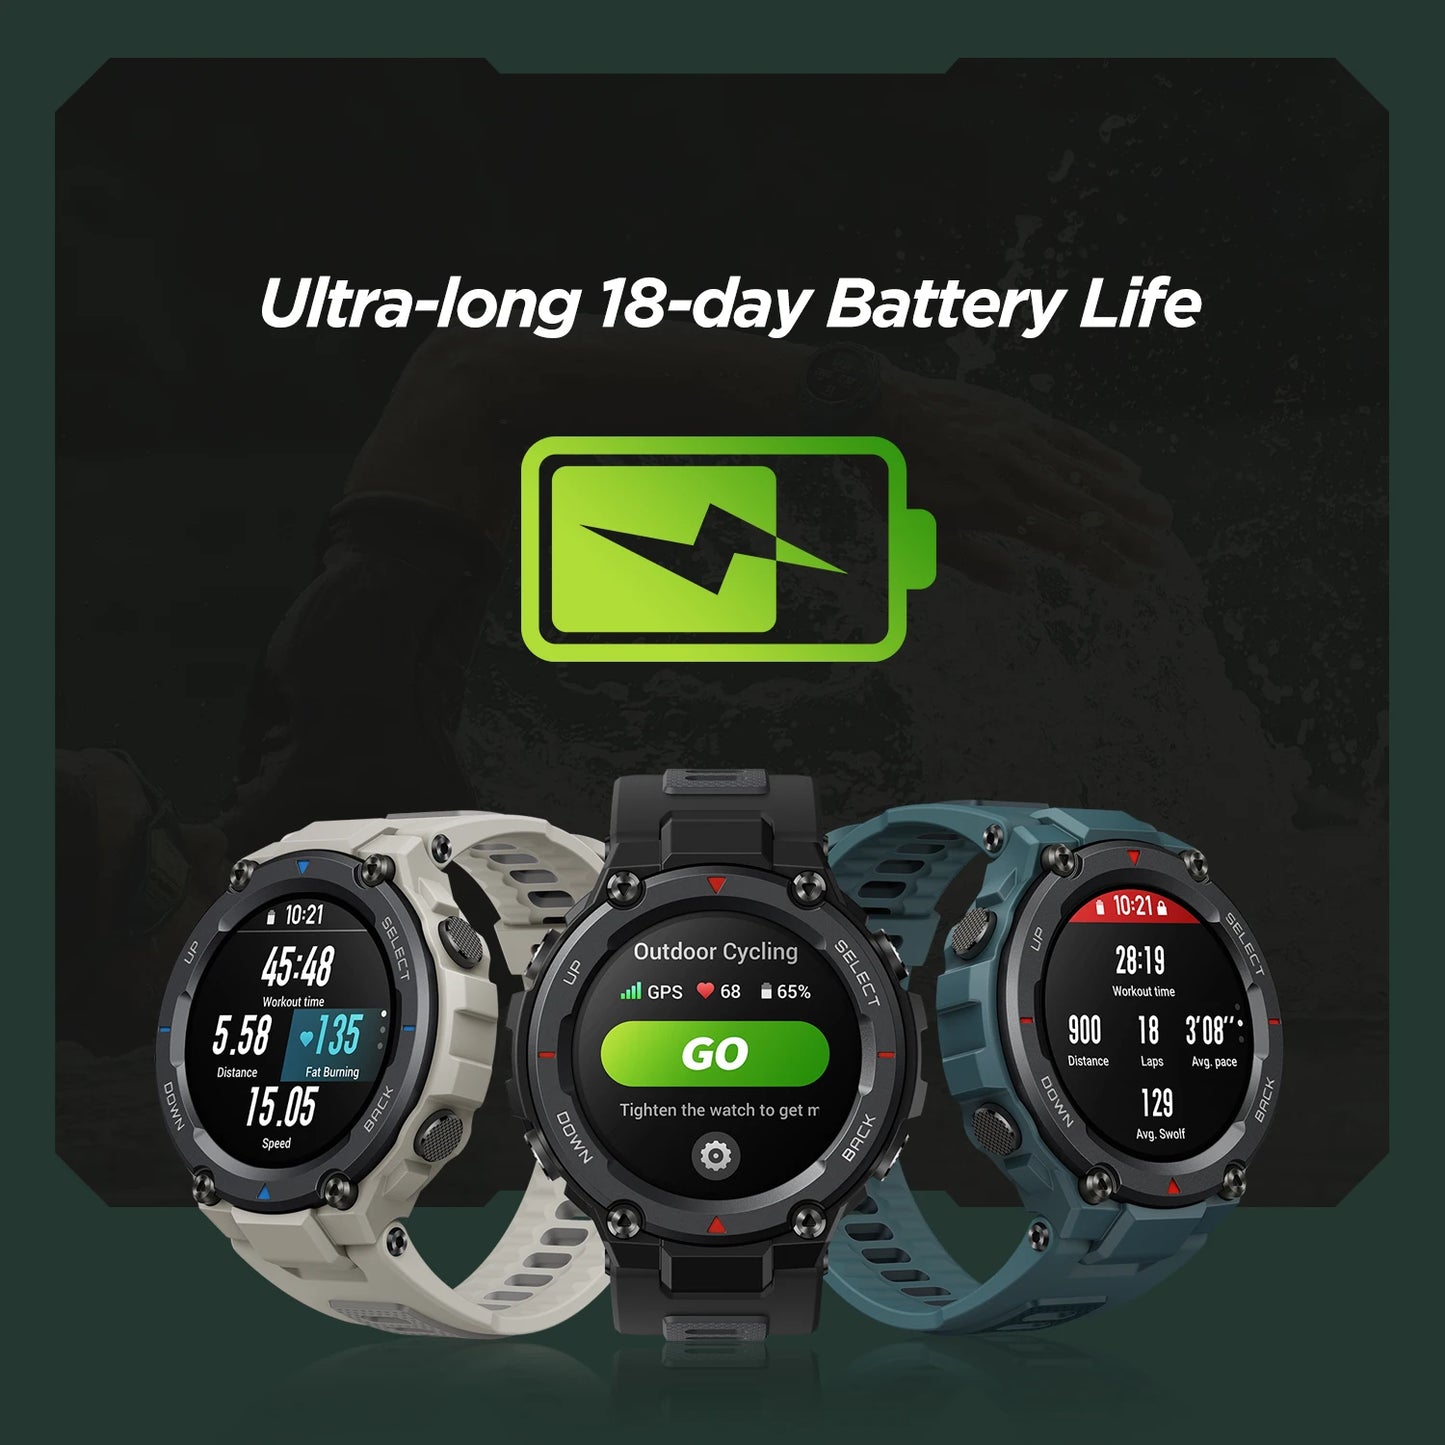 Amazfit T-rex Trex Pro T Rex GPS Waterproof Smartwatch Outdoor 18-day Battery Life 390mAh Smart Watch For Android iOS Phone